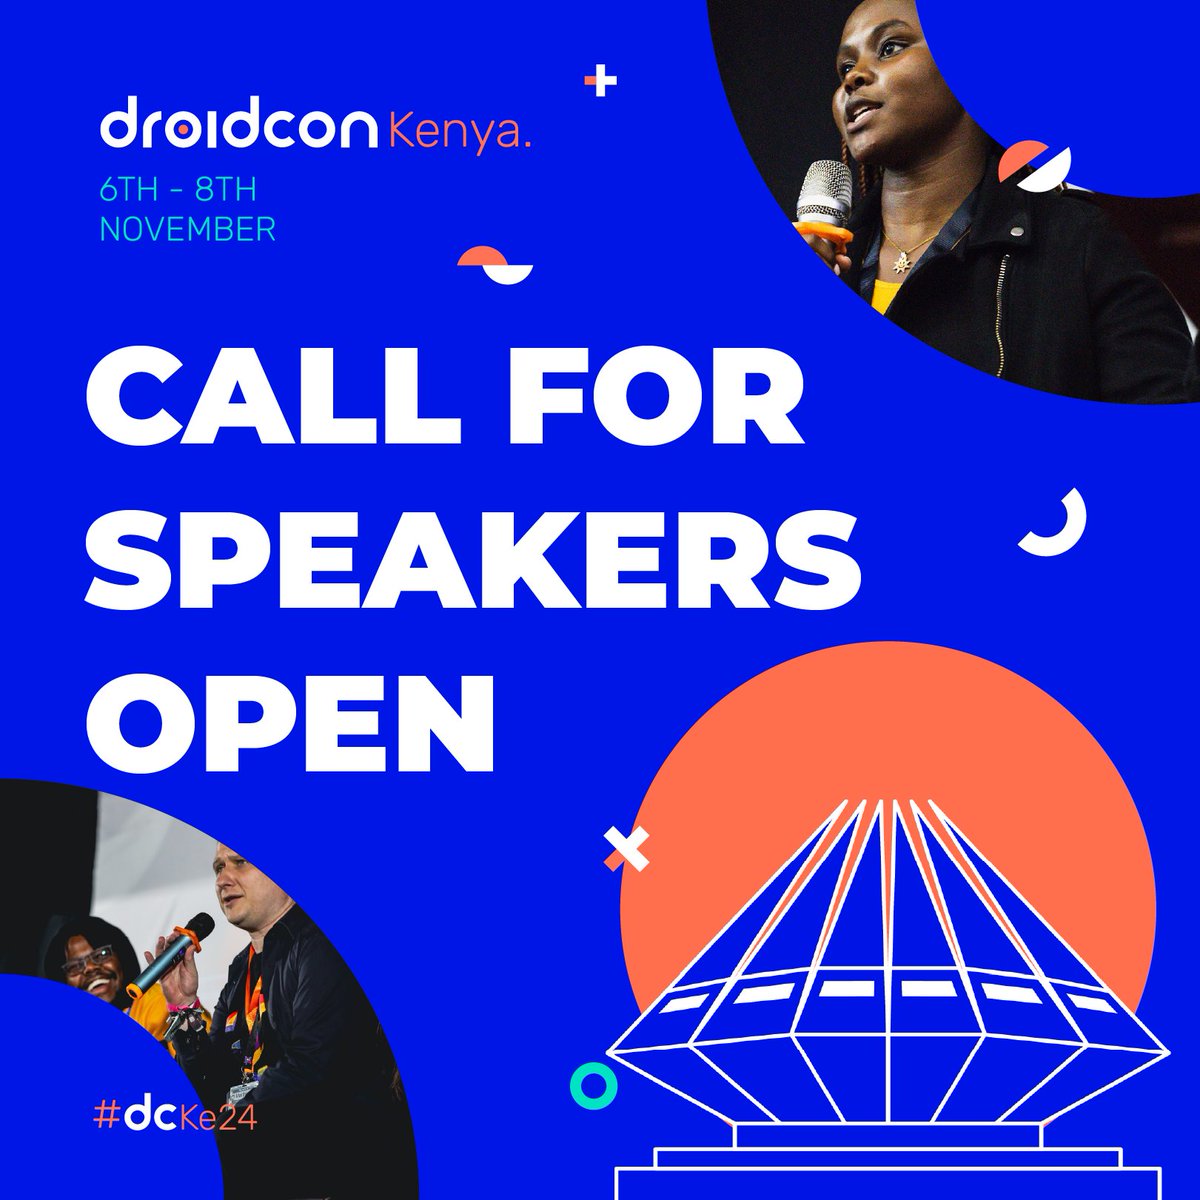 #dcke24 CFS is open🥳🥳! Calling all Android and Flutter developers ! This is your chance to share your expertise, insight and innovations with our vibrant mobile developer community in Kenya. We can't wait to receive your awesome abstracts. Apply: bit.ly/dcke24CFP